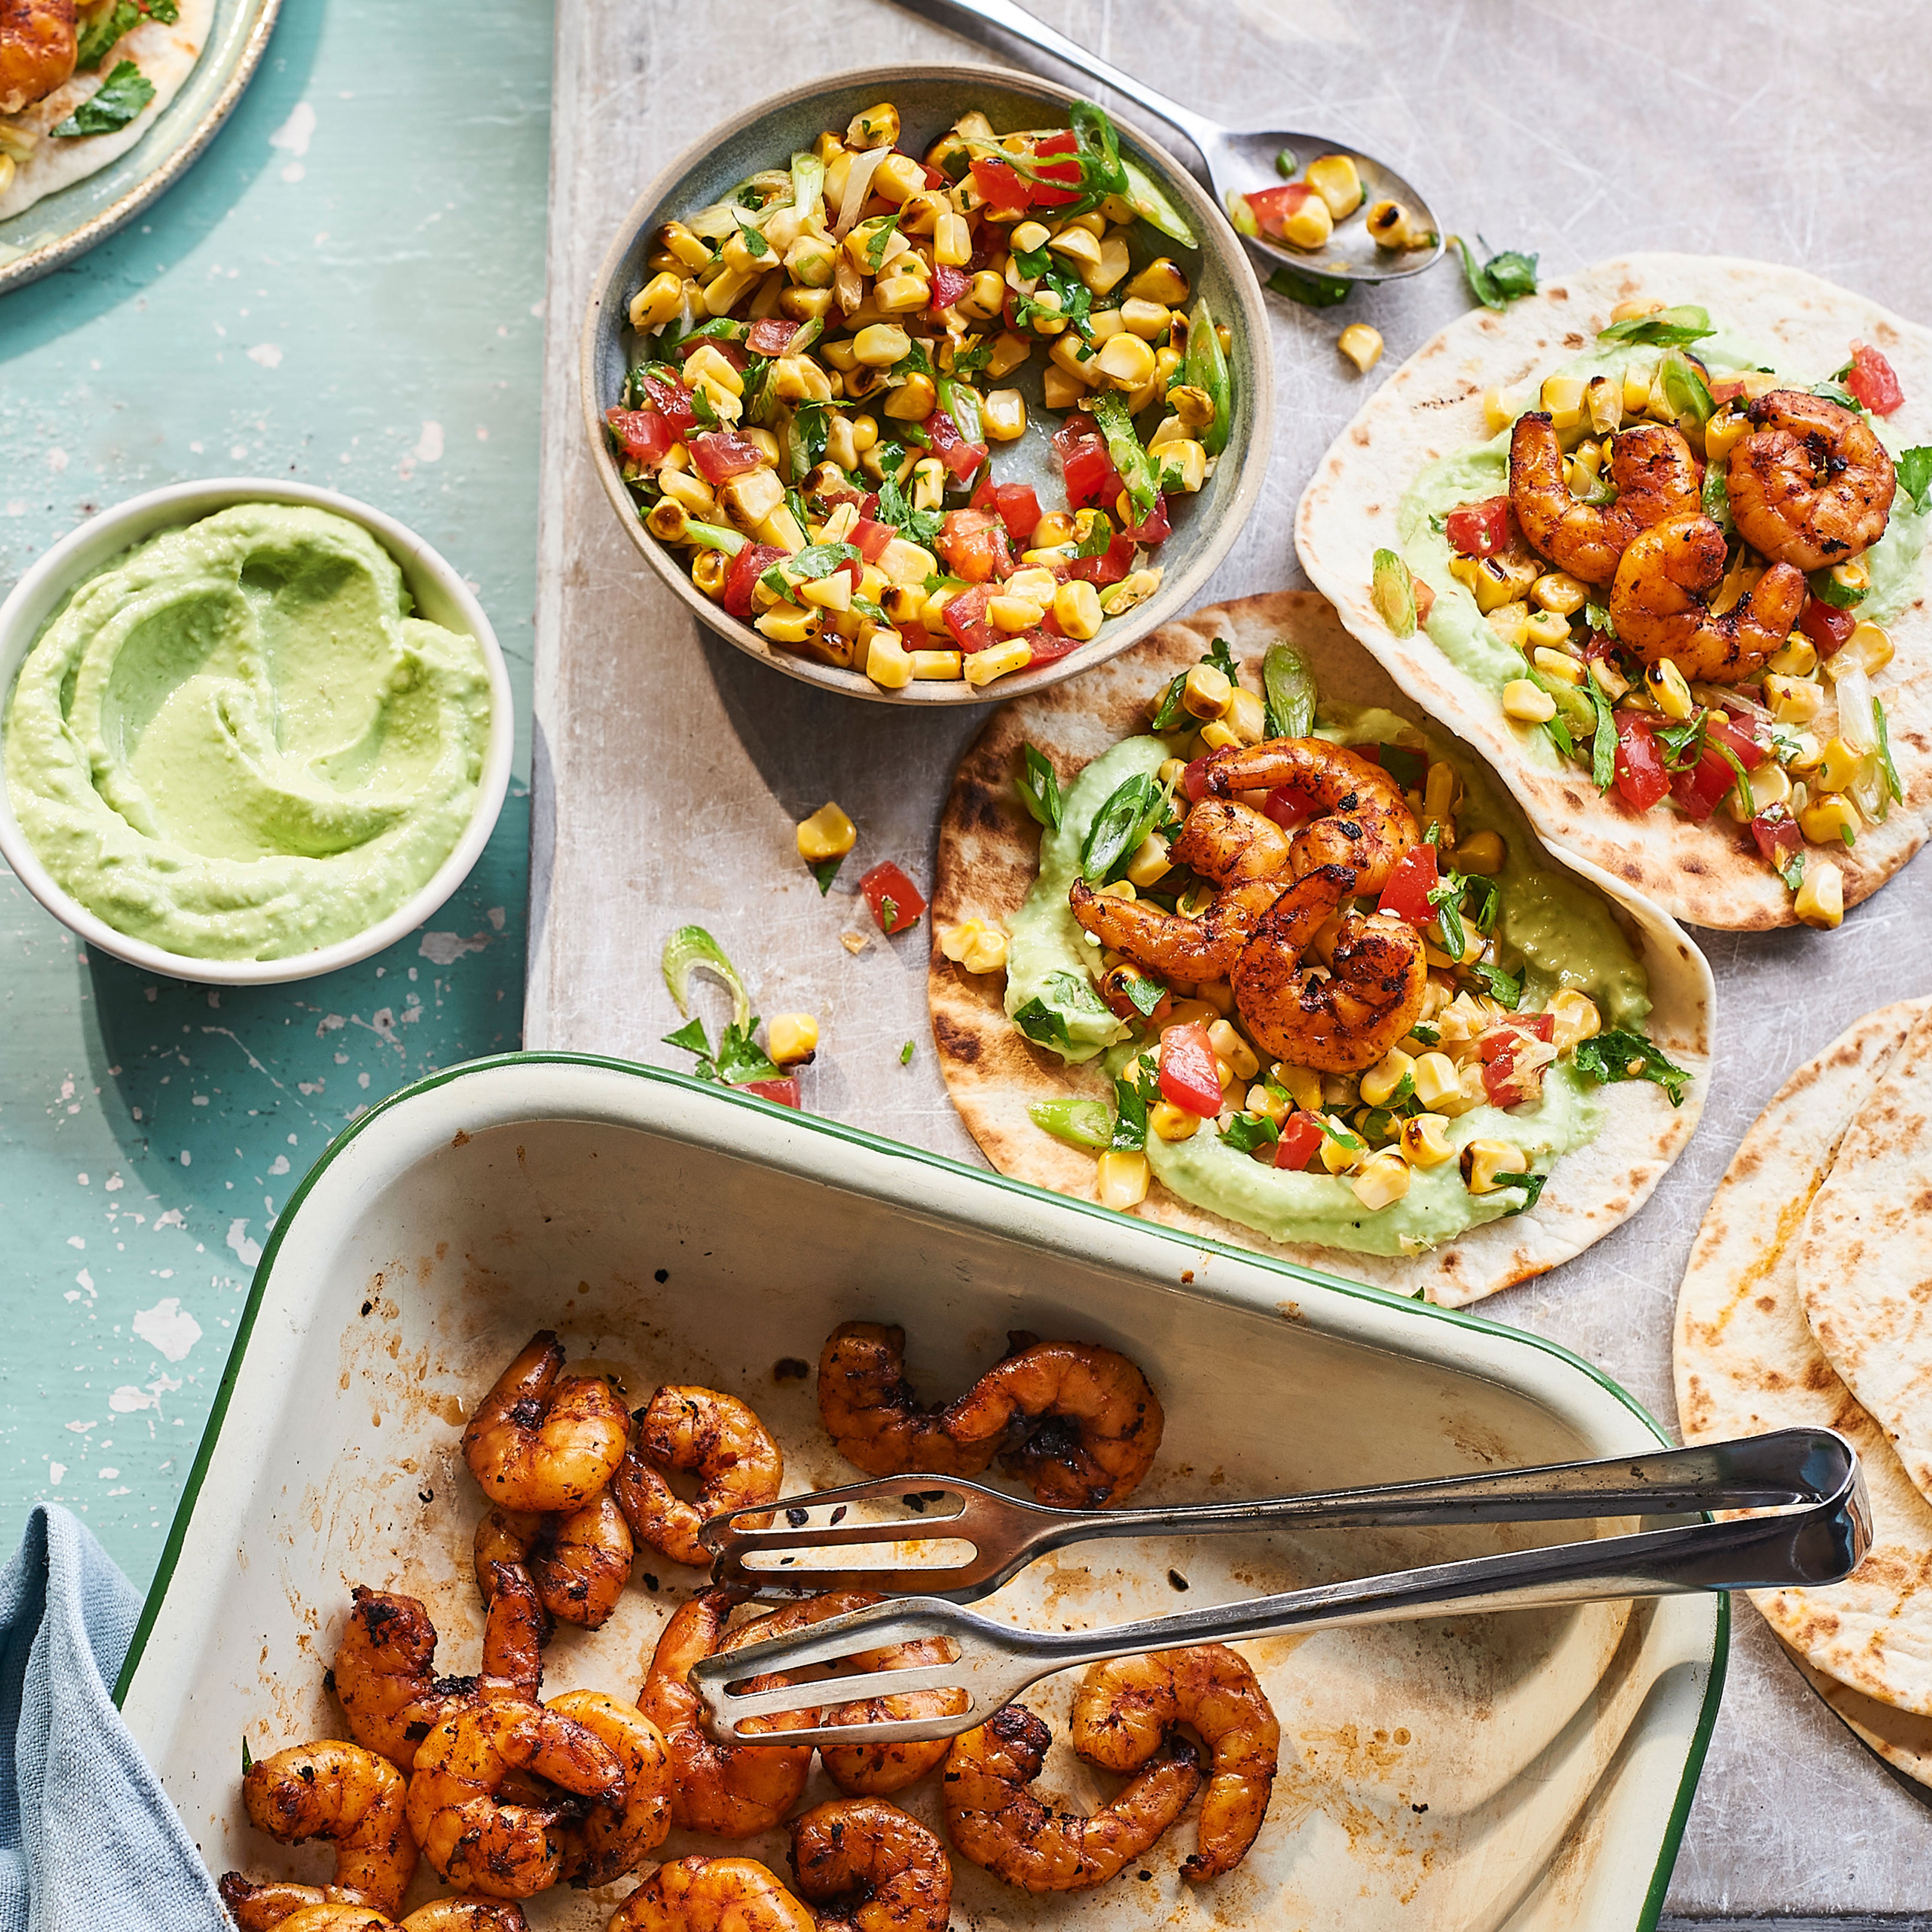 Chipotle prawn tacos with sweetcorn salsa